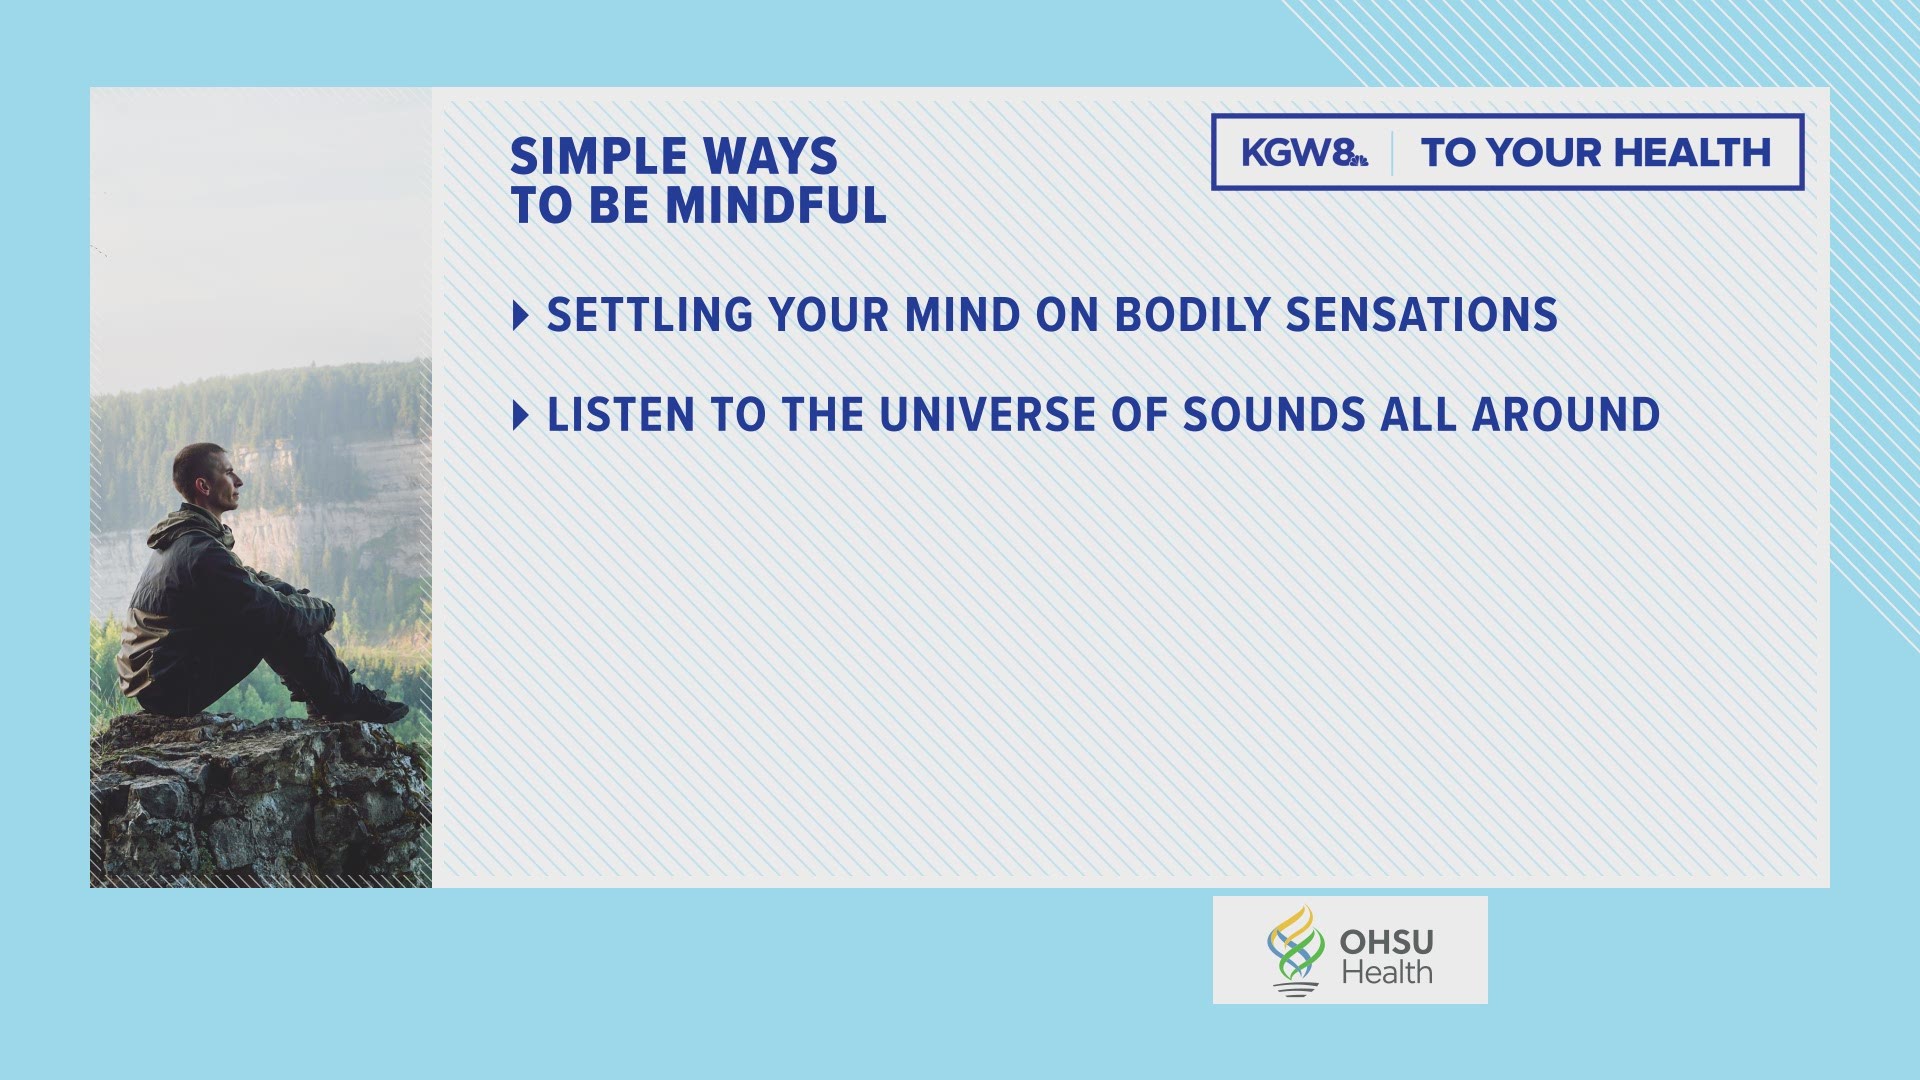 From OHSU Health, here are five simple ways to be mindful.